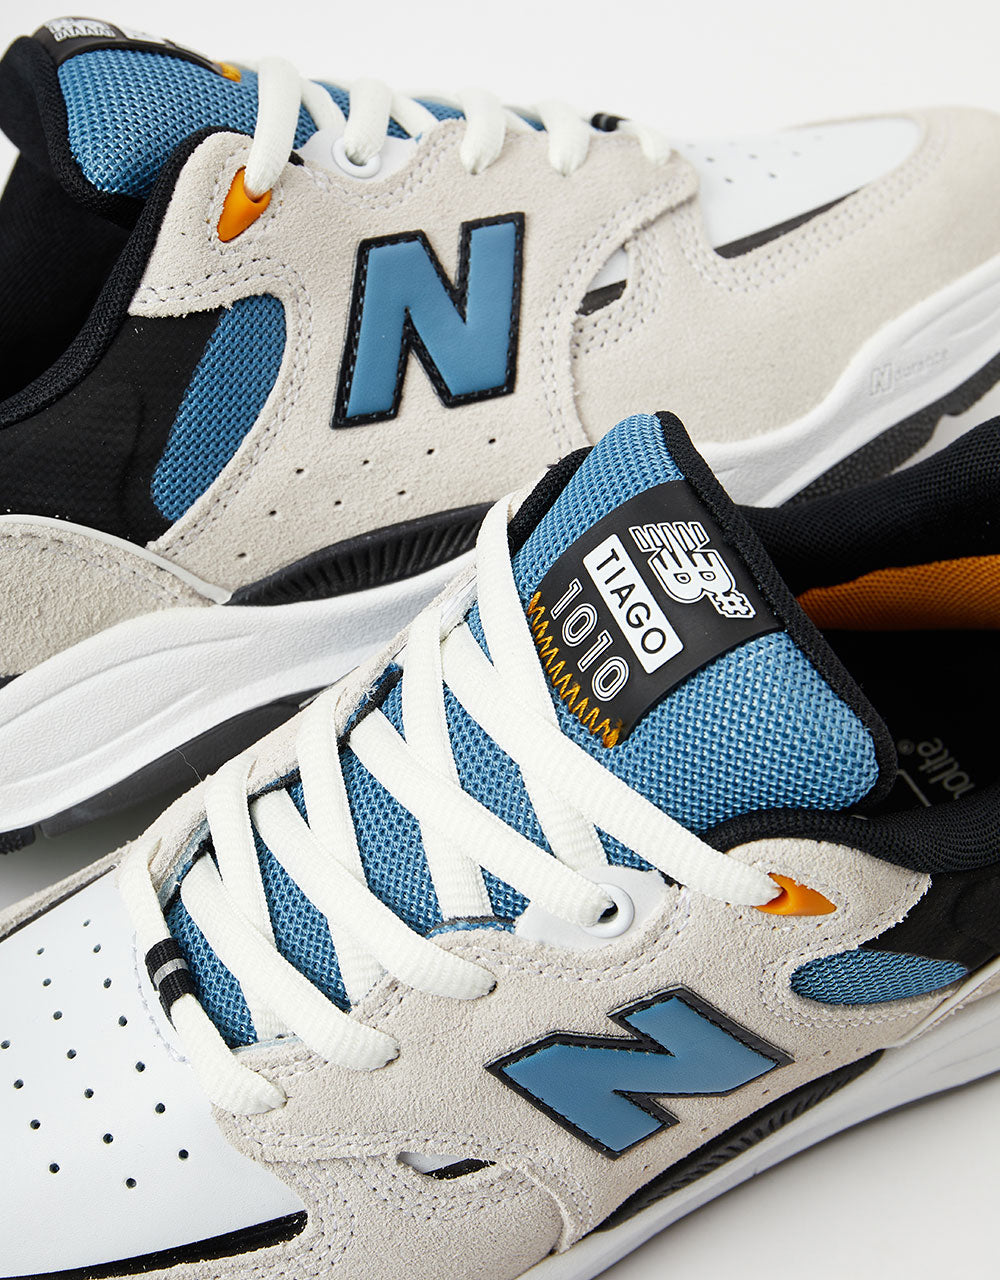 New Balance Numeric 1010 R1 UK Exclusive Skate Shoes - Light Grey/Blue